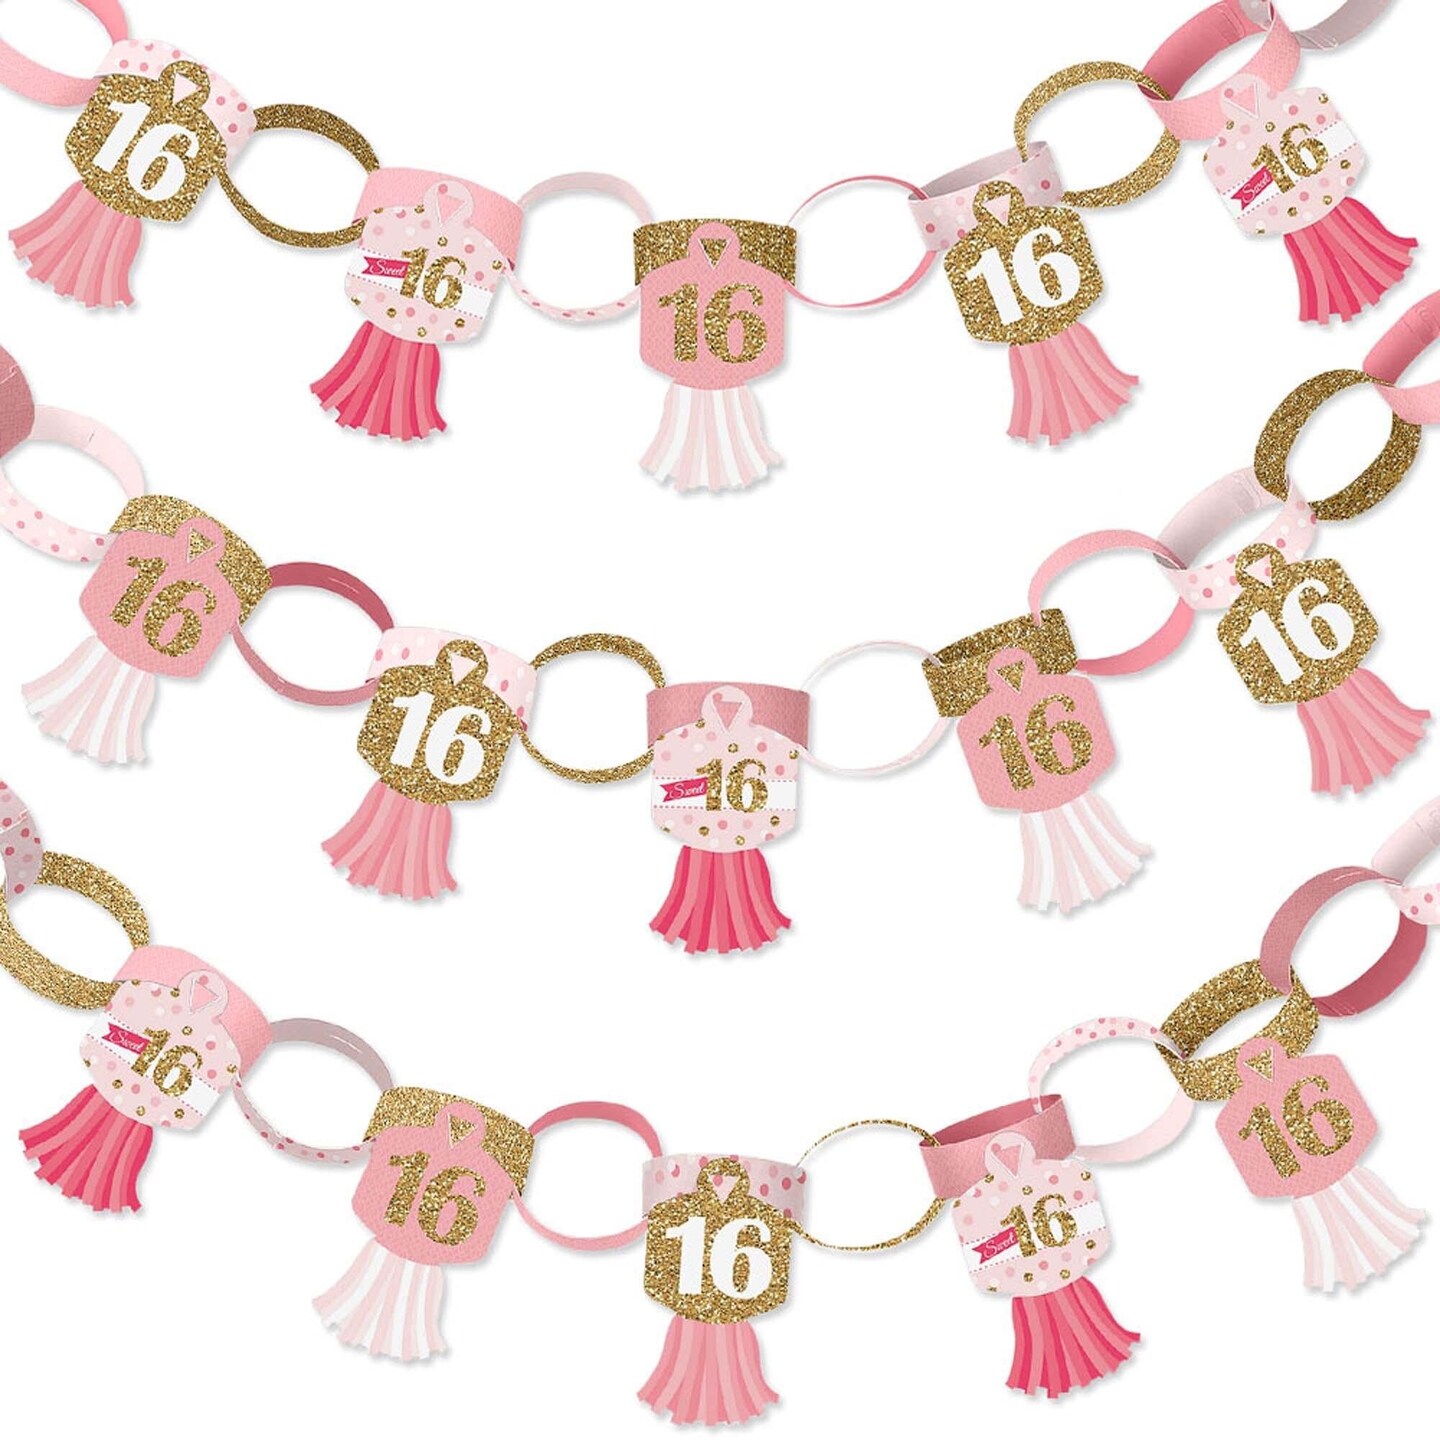 Big Dot of Happiness Sweet 16 - 90 Chain Links and 30 Paper Tassels Decoration Kit - 16th Birthday Party Paper Chains Garland - 21 feet